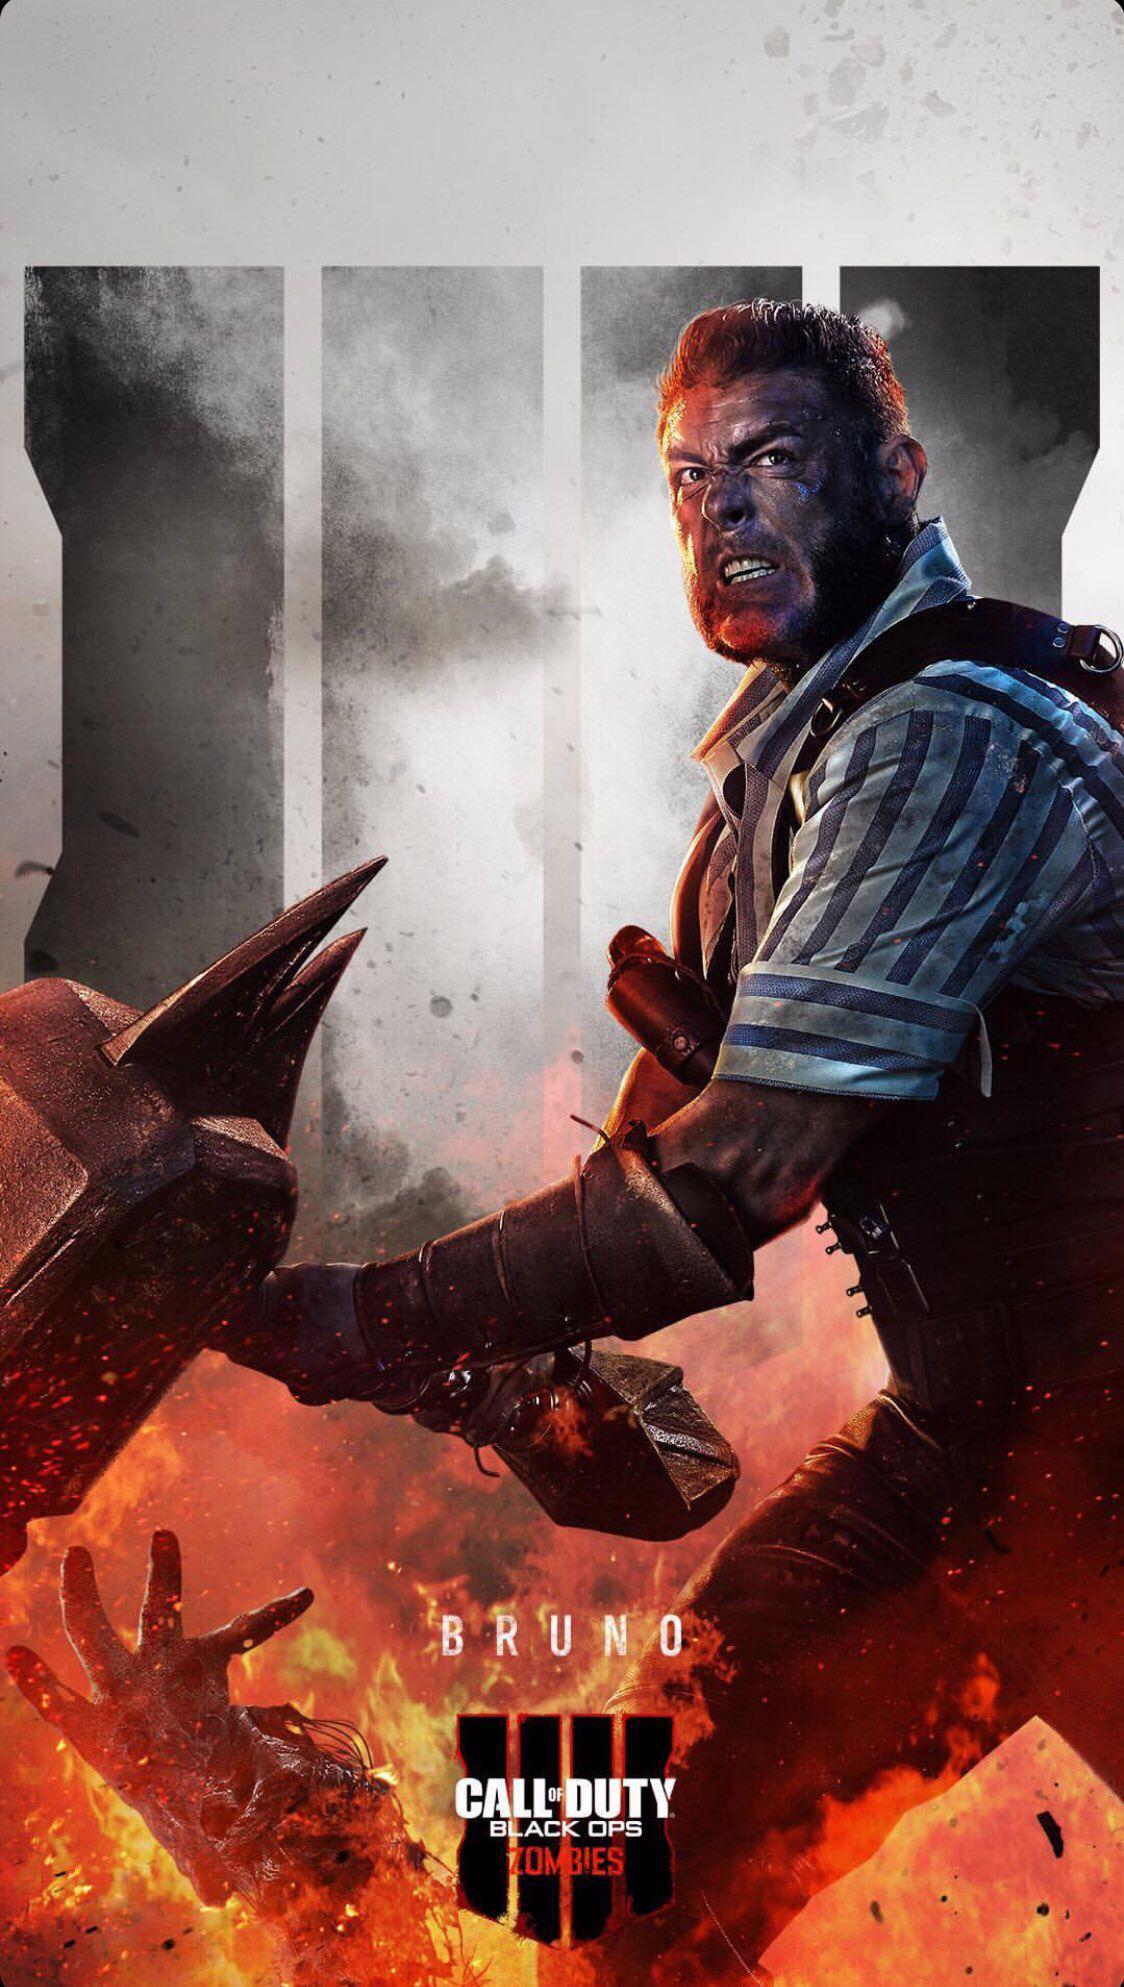 New Black Ops 4 Zombies phone wallpaper